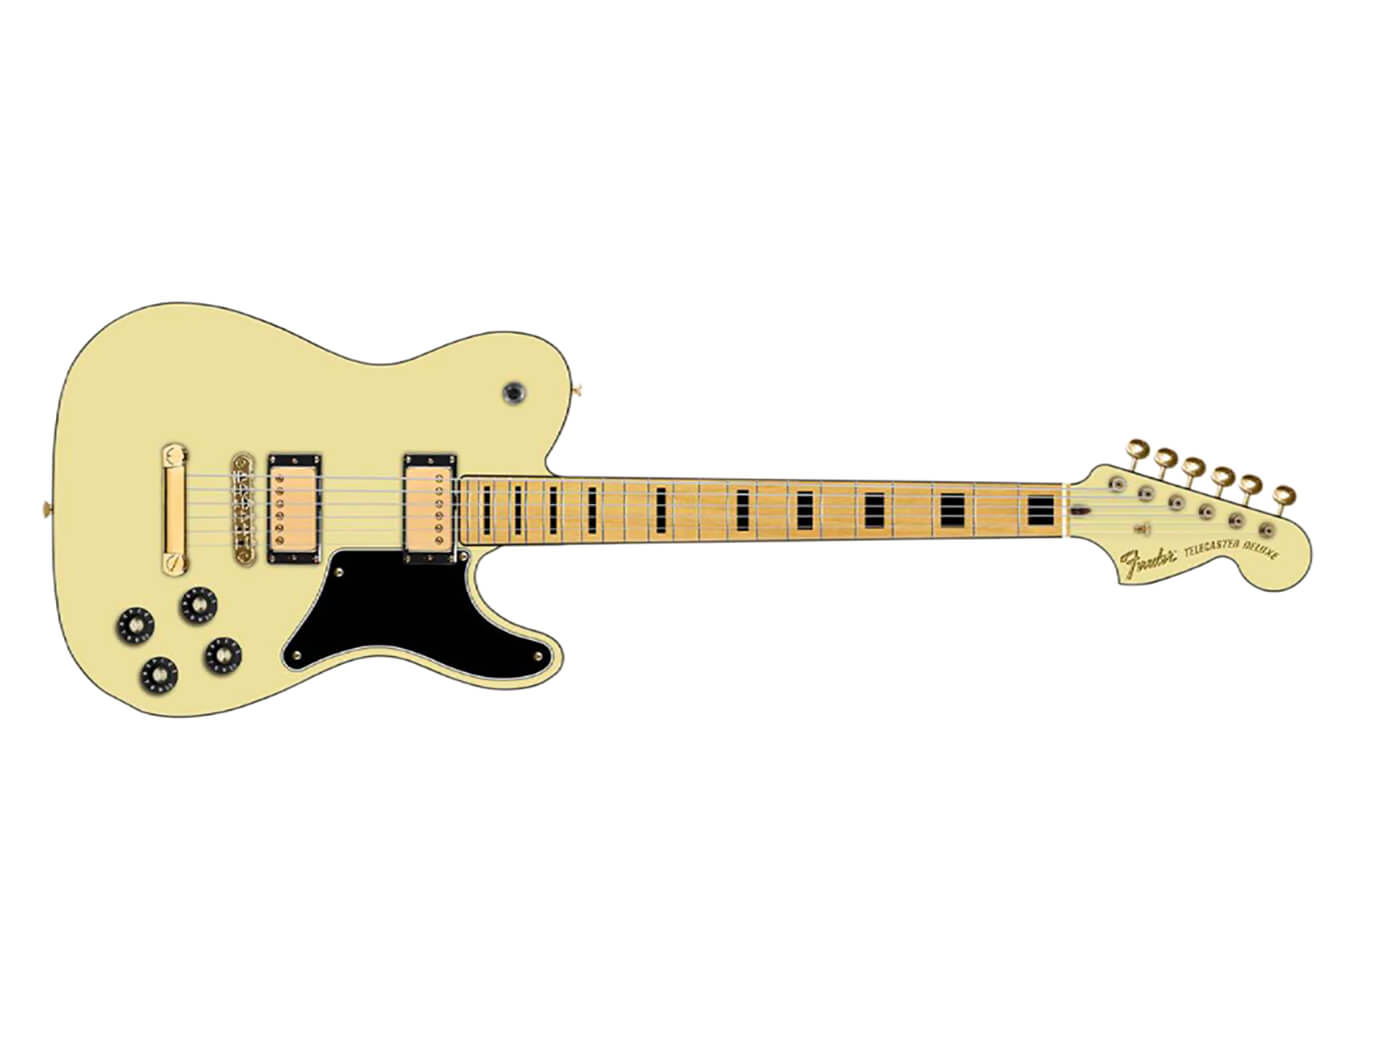 Parallel Universe Troublemaker Telecaster Deluxe